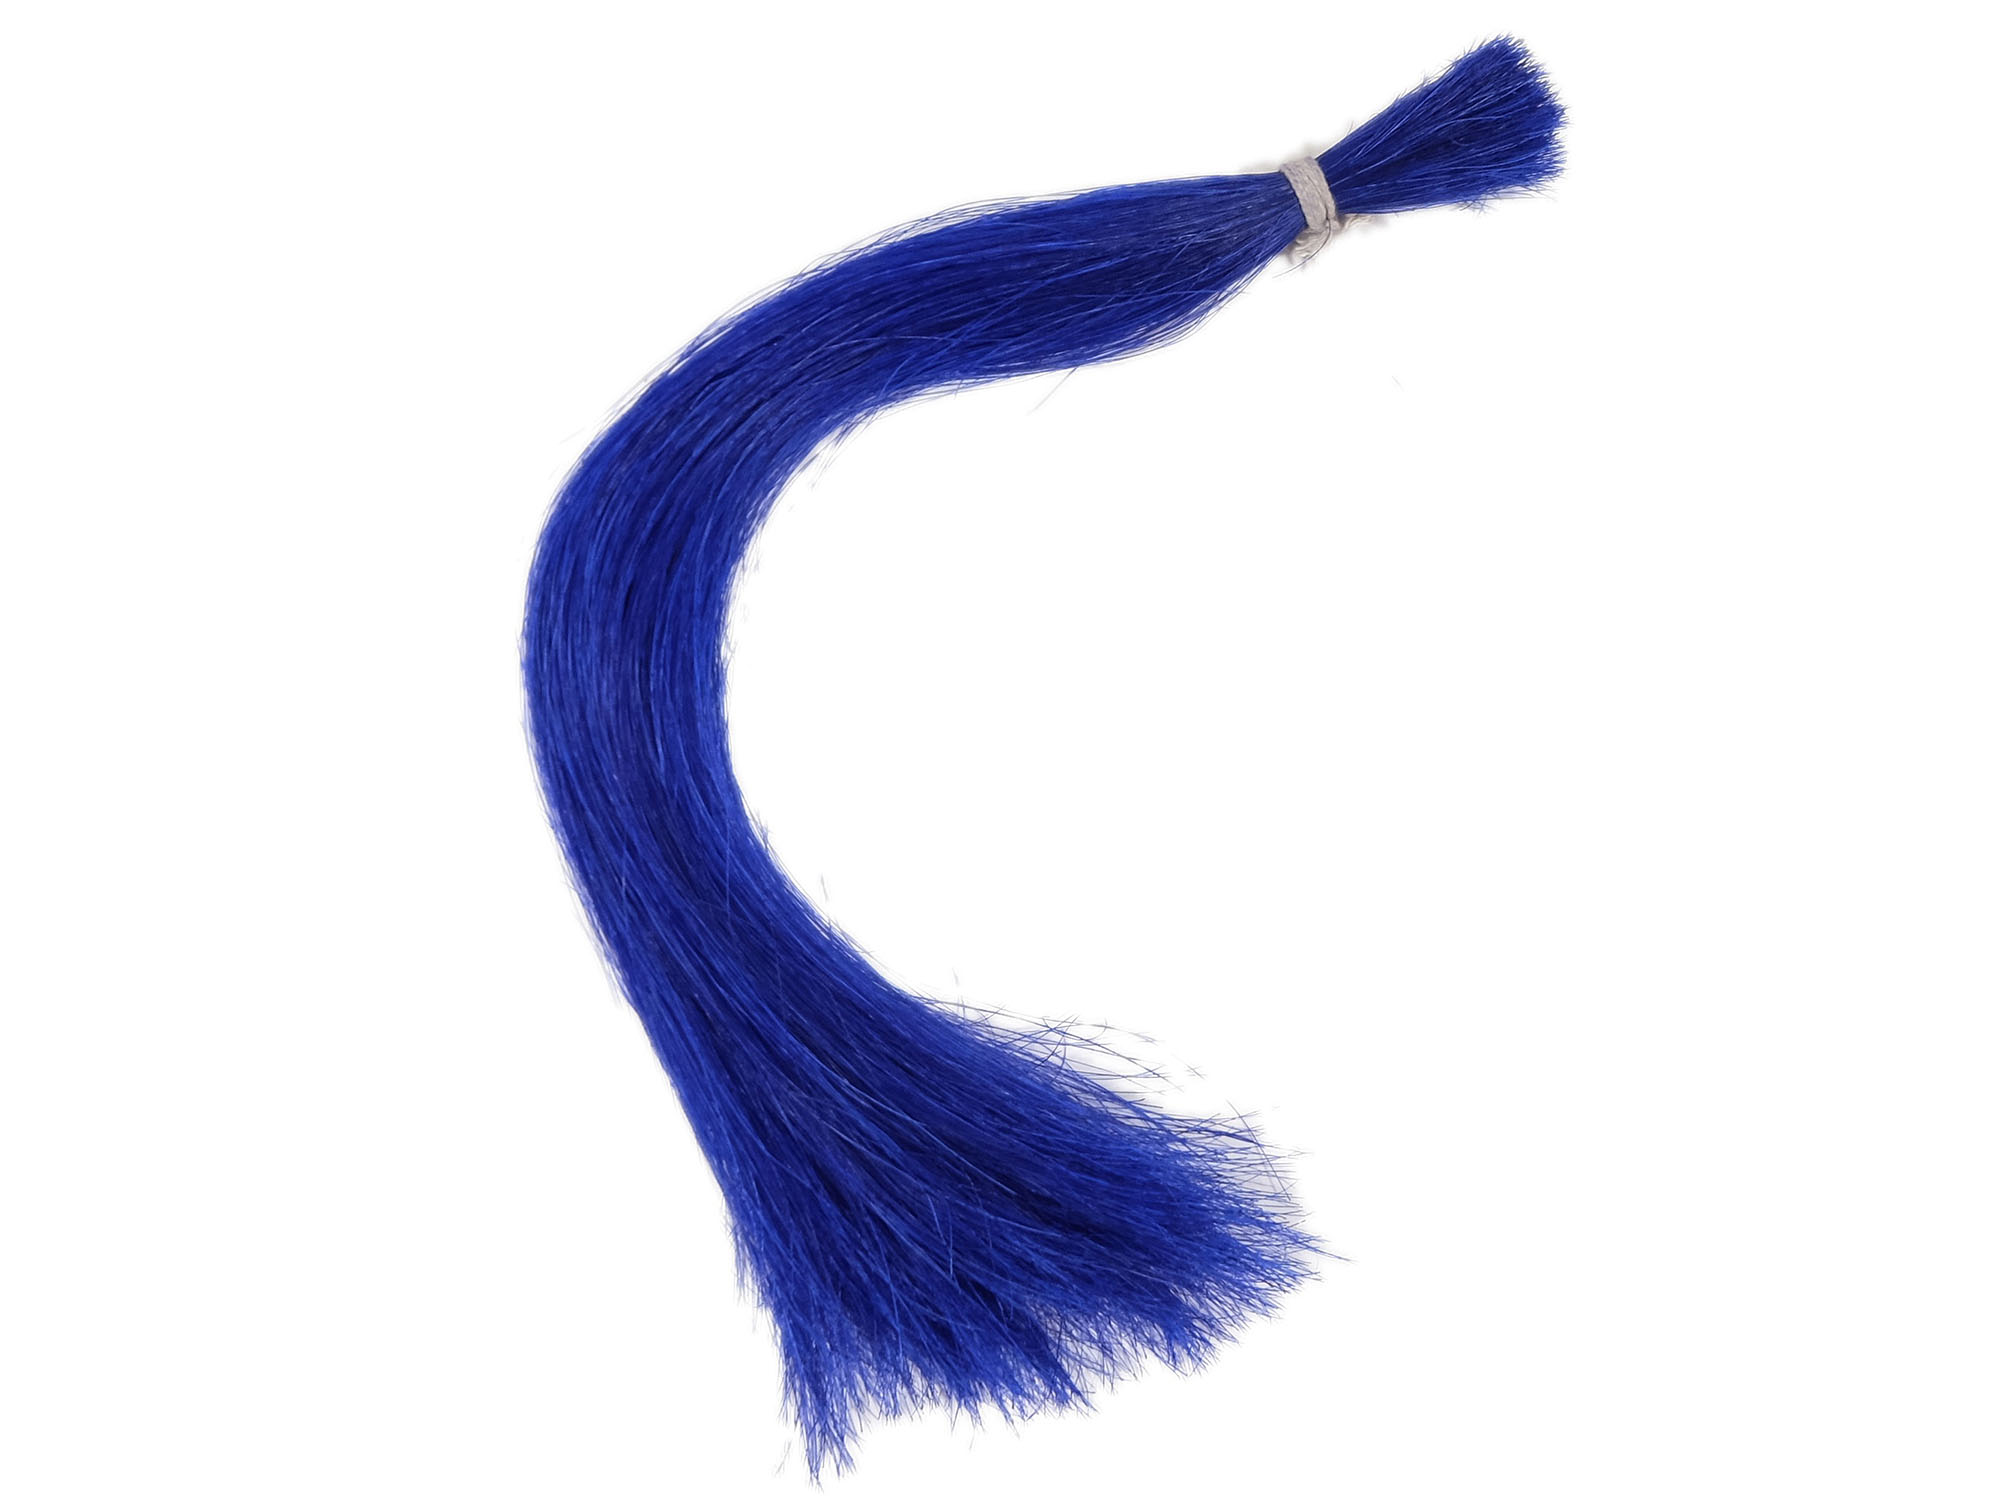 Dyed Horse Tail Hair: Double Drawn: 13-14": Navy Blue (oz) 